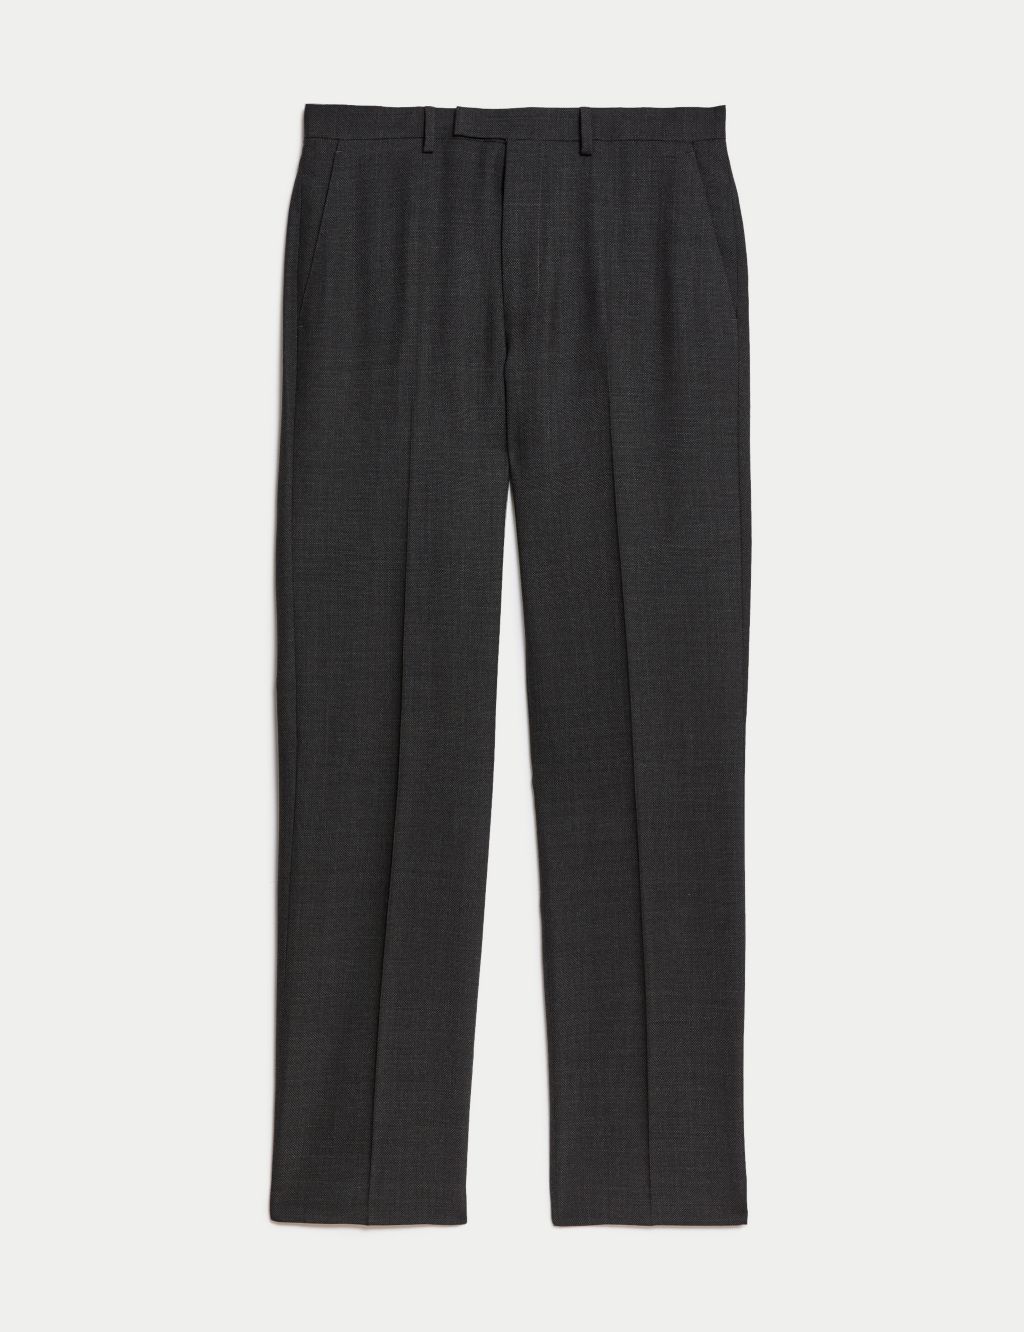 Regular Fit Pure Wool Textured Suit Trousers image 1